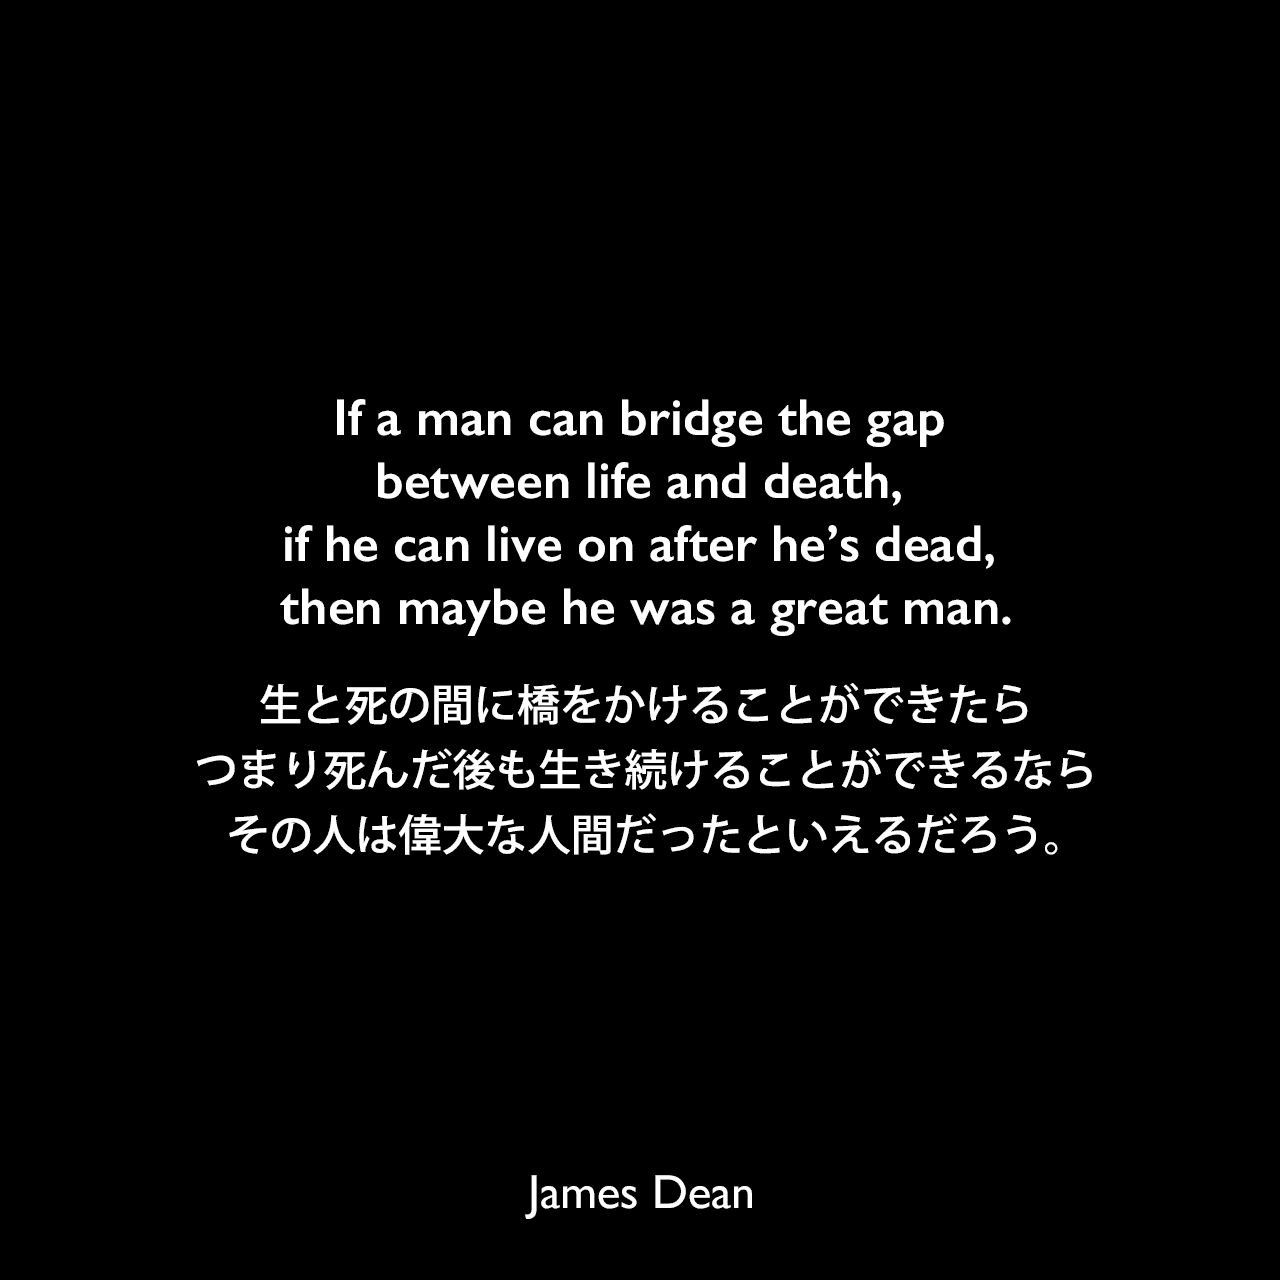 If a man can bridge the gap between life and death, if he can live on after he’s dead, then maybe he was a great man.生と死の間に橋をかけることができたら、つまり死んだ後も生き続けることができるなら、その人は偉大な人間だったといえるだろう。James Dean